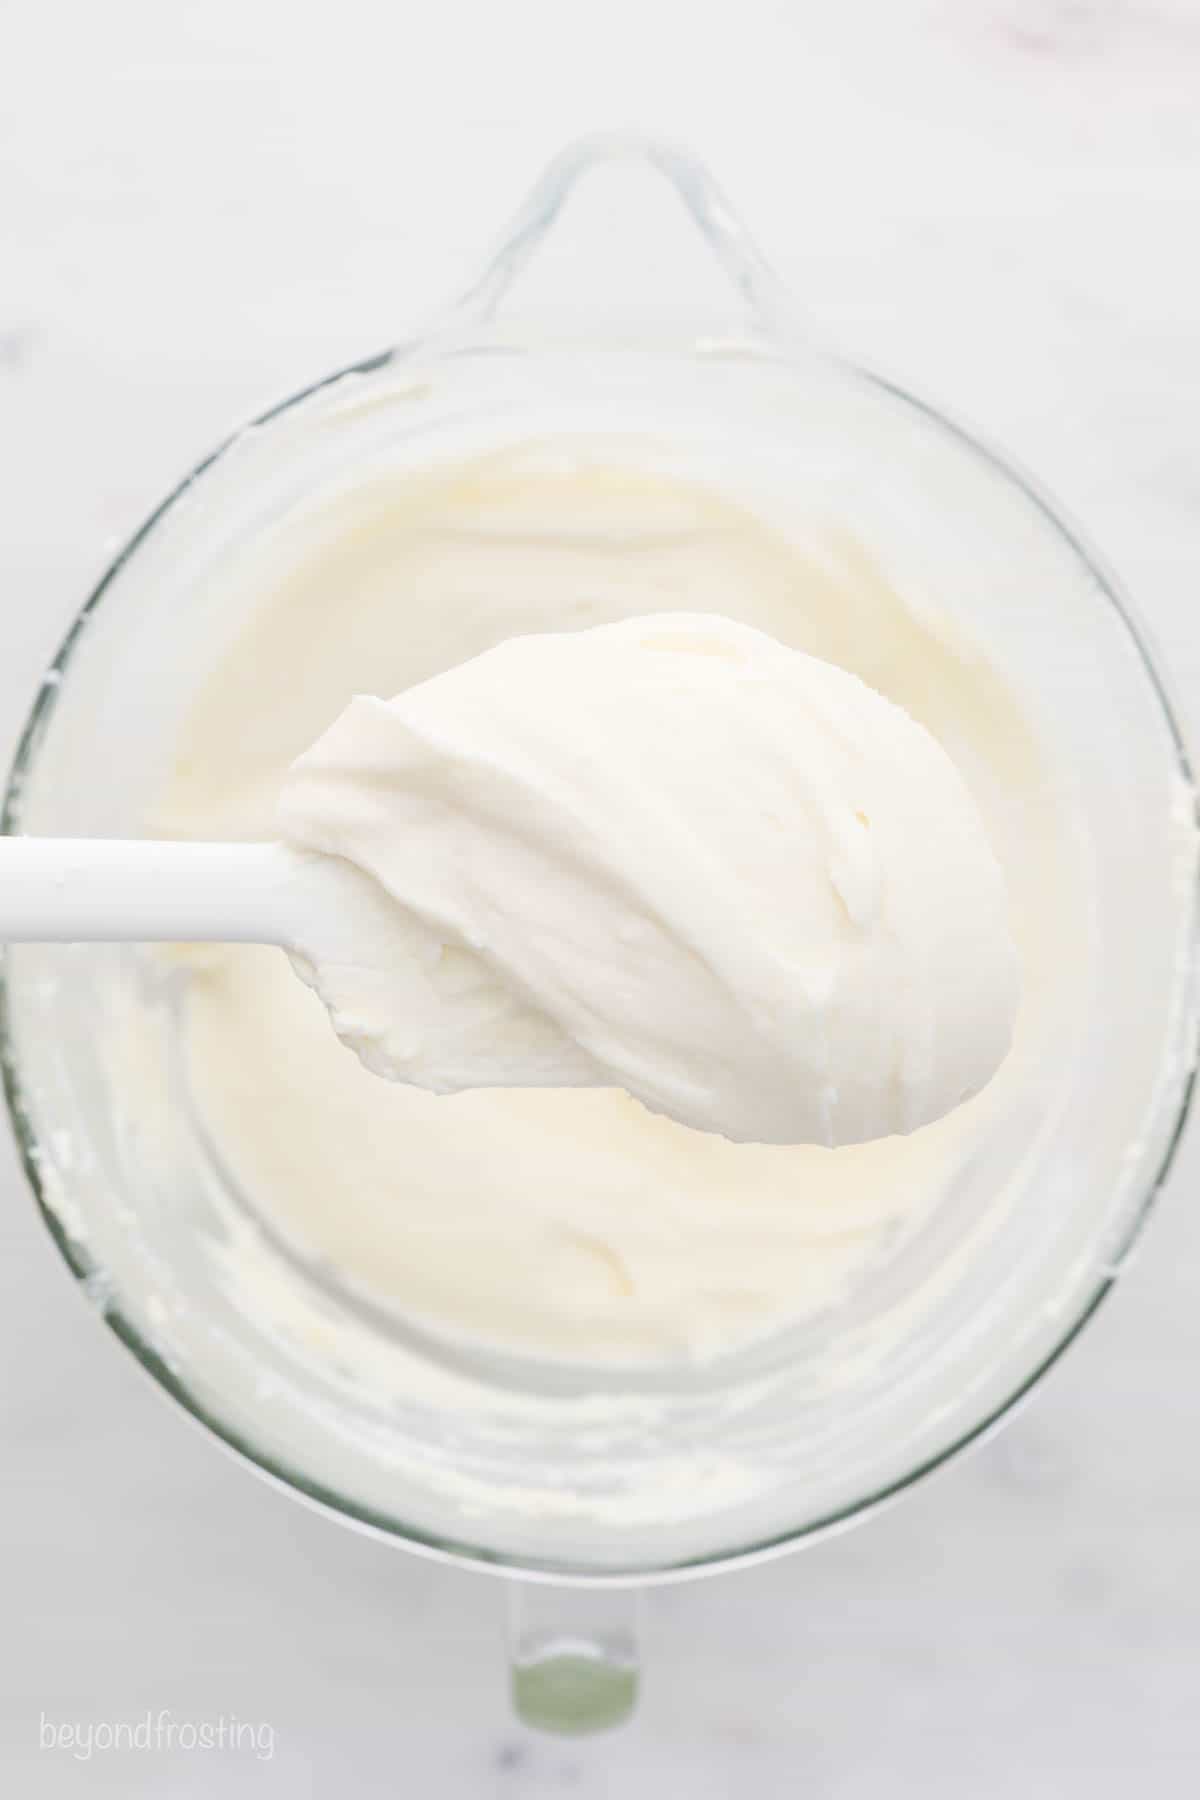 A white spatula with cream cheese frosting being held over a glass mixing bowl